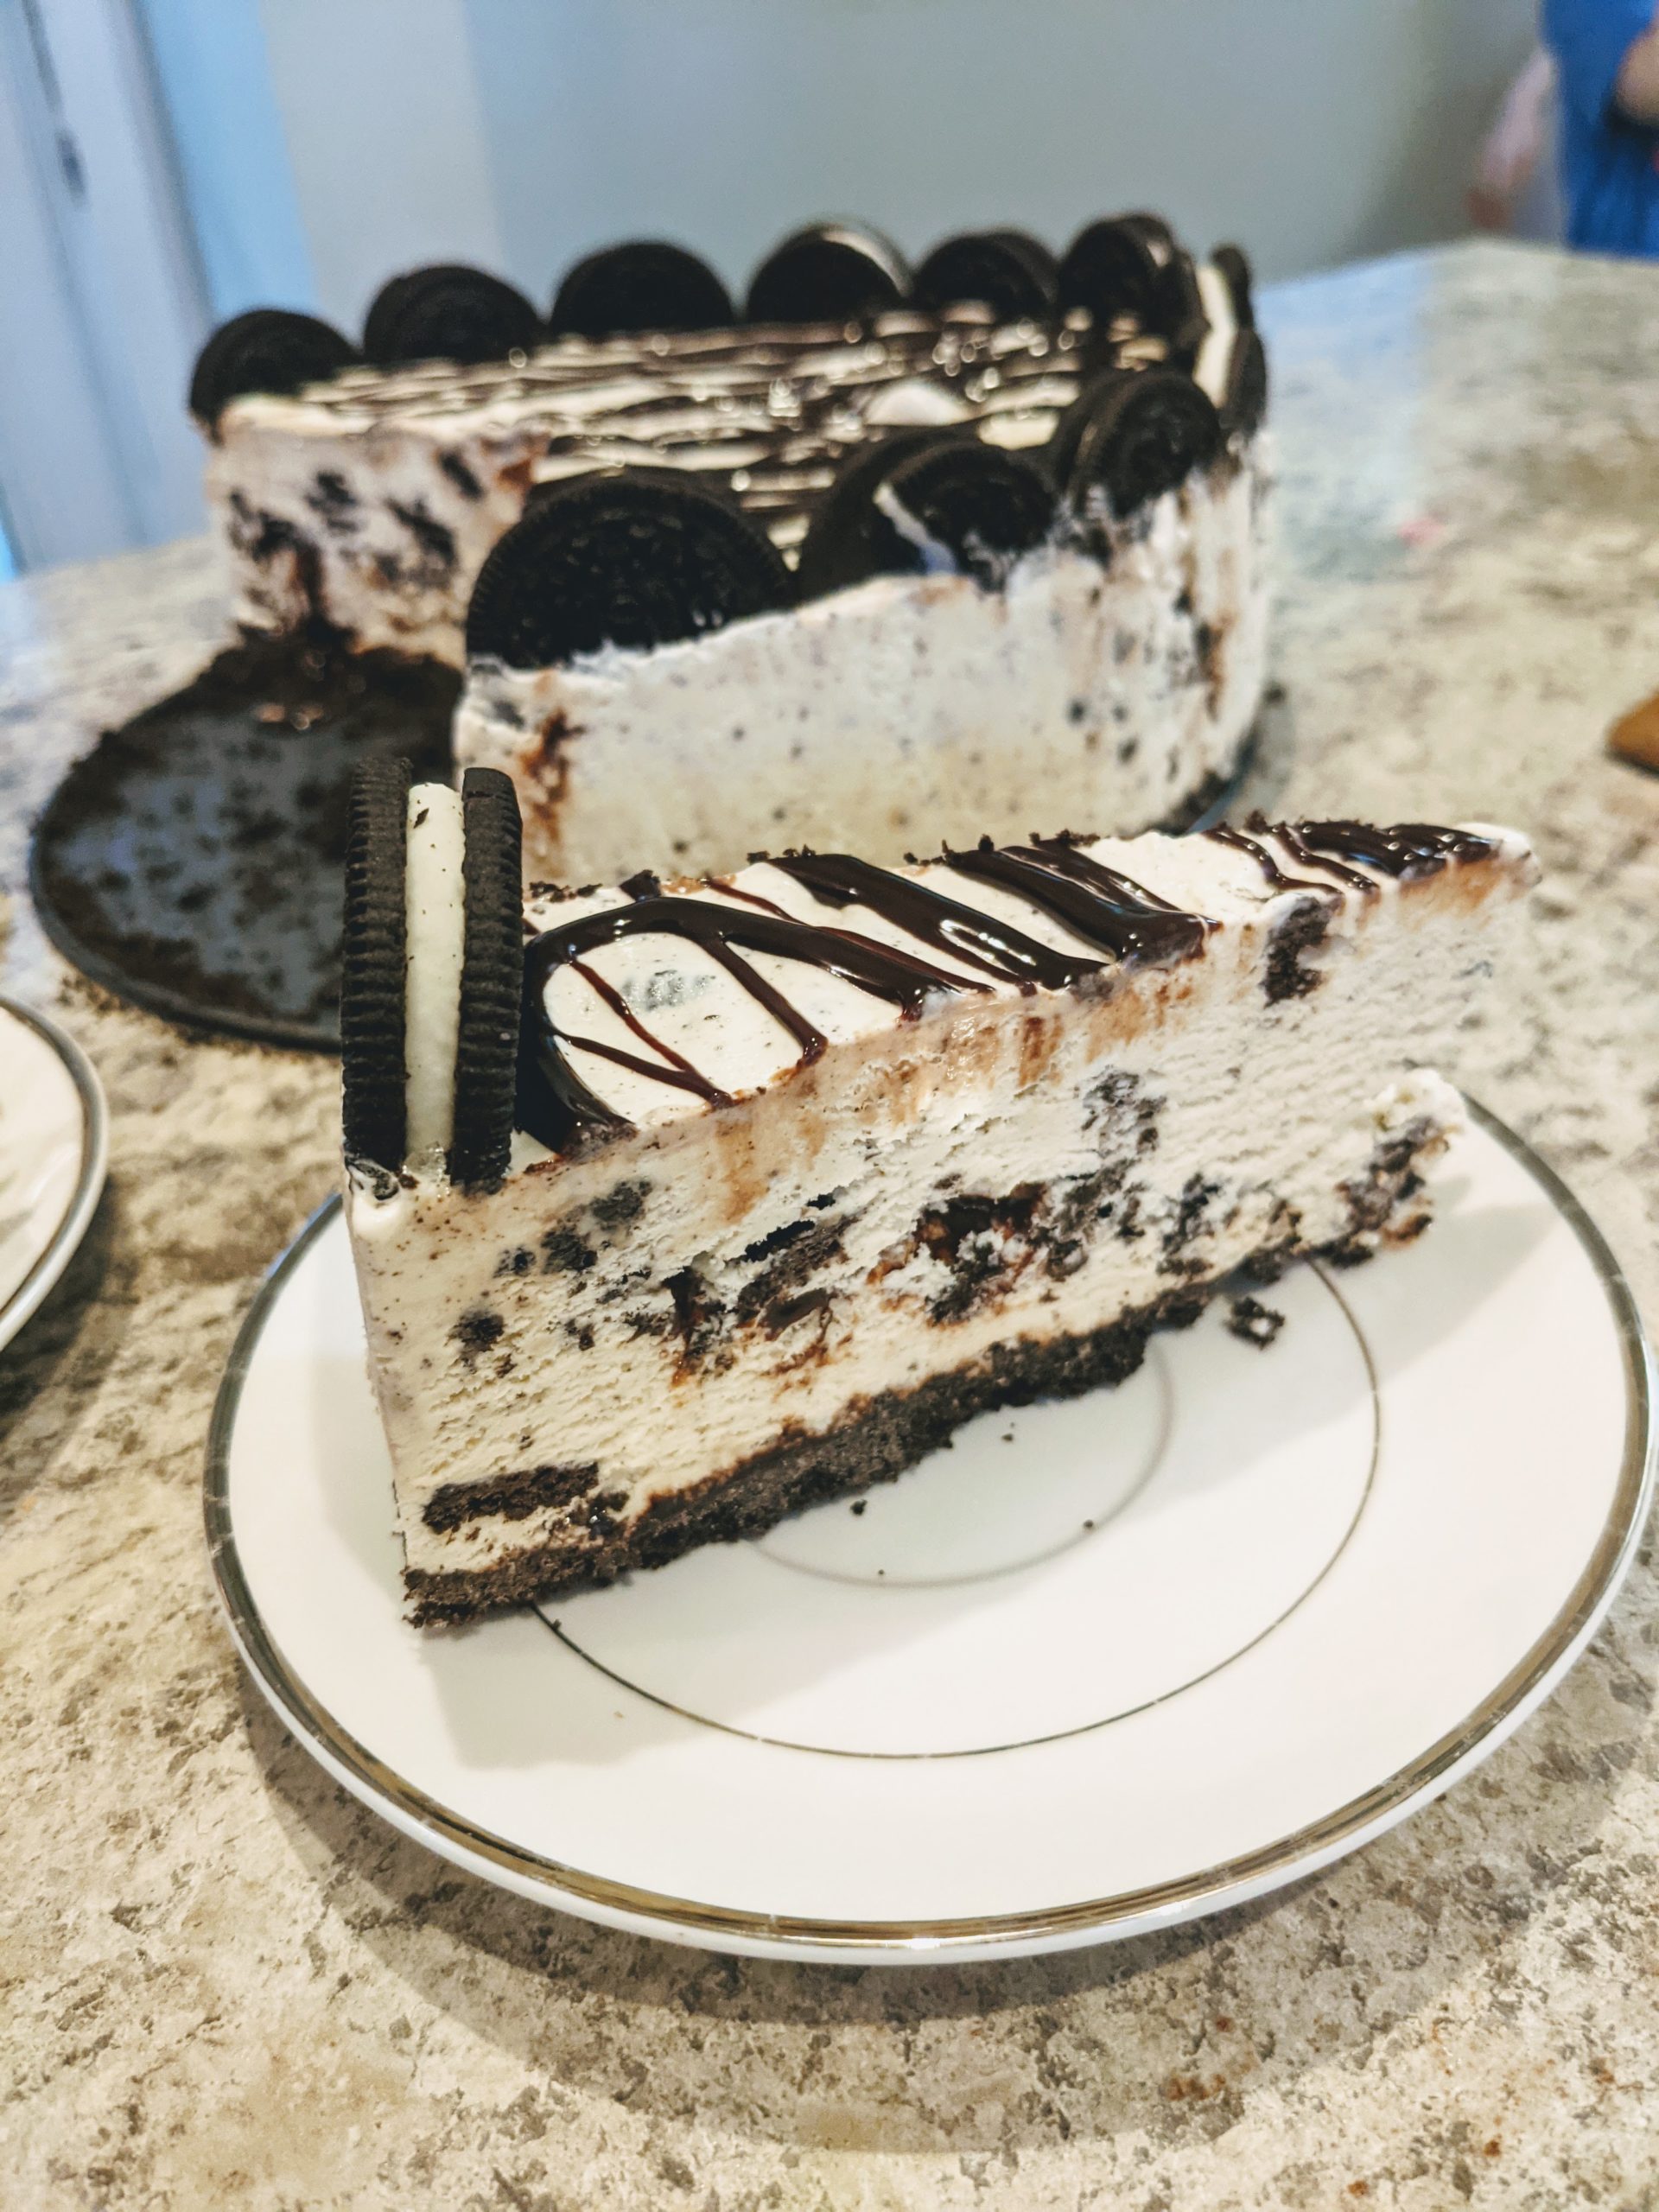 Reese's Ice Cream Cake | Cupcakes & Kale Chips